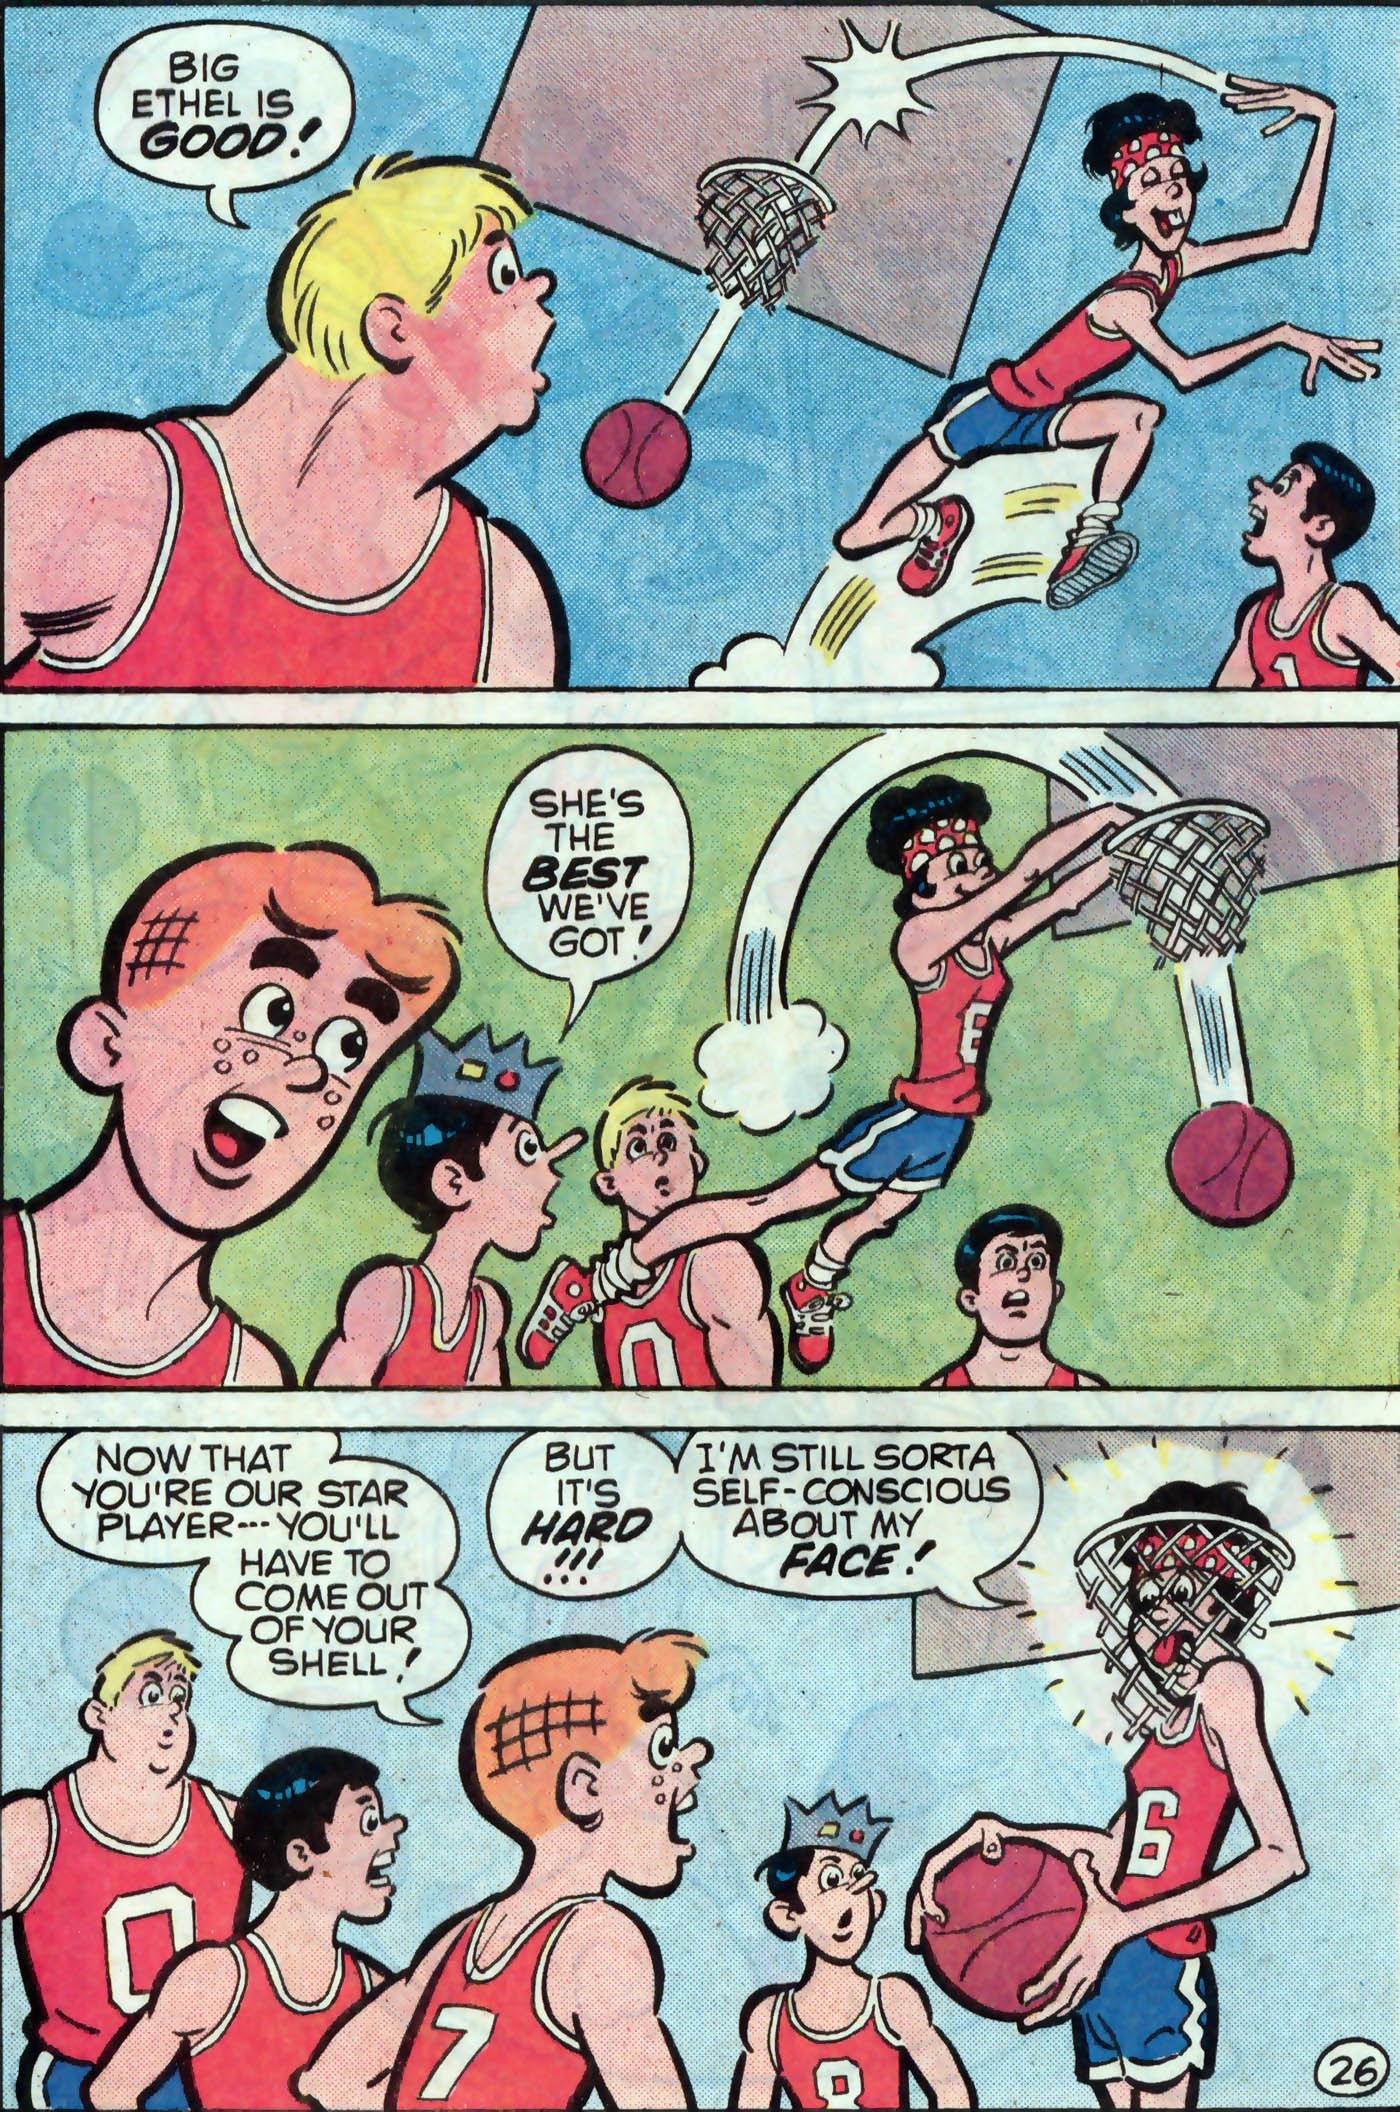 Read online Archie and Big Ethel comic -  Issue # Full - 25